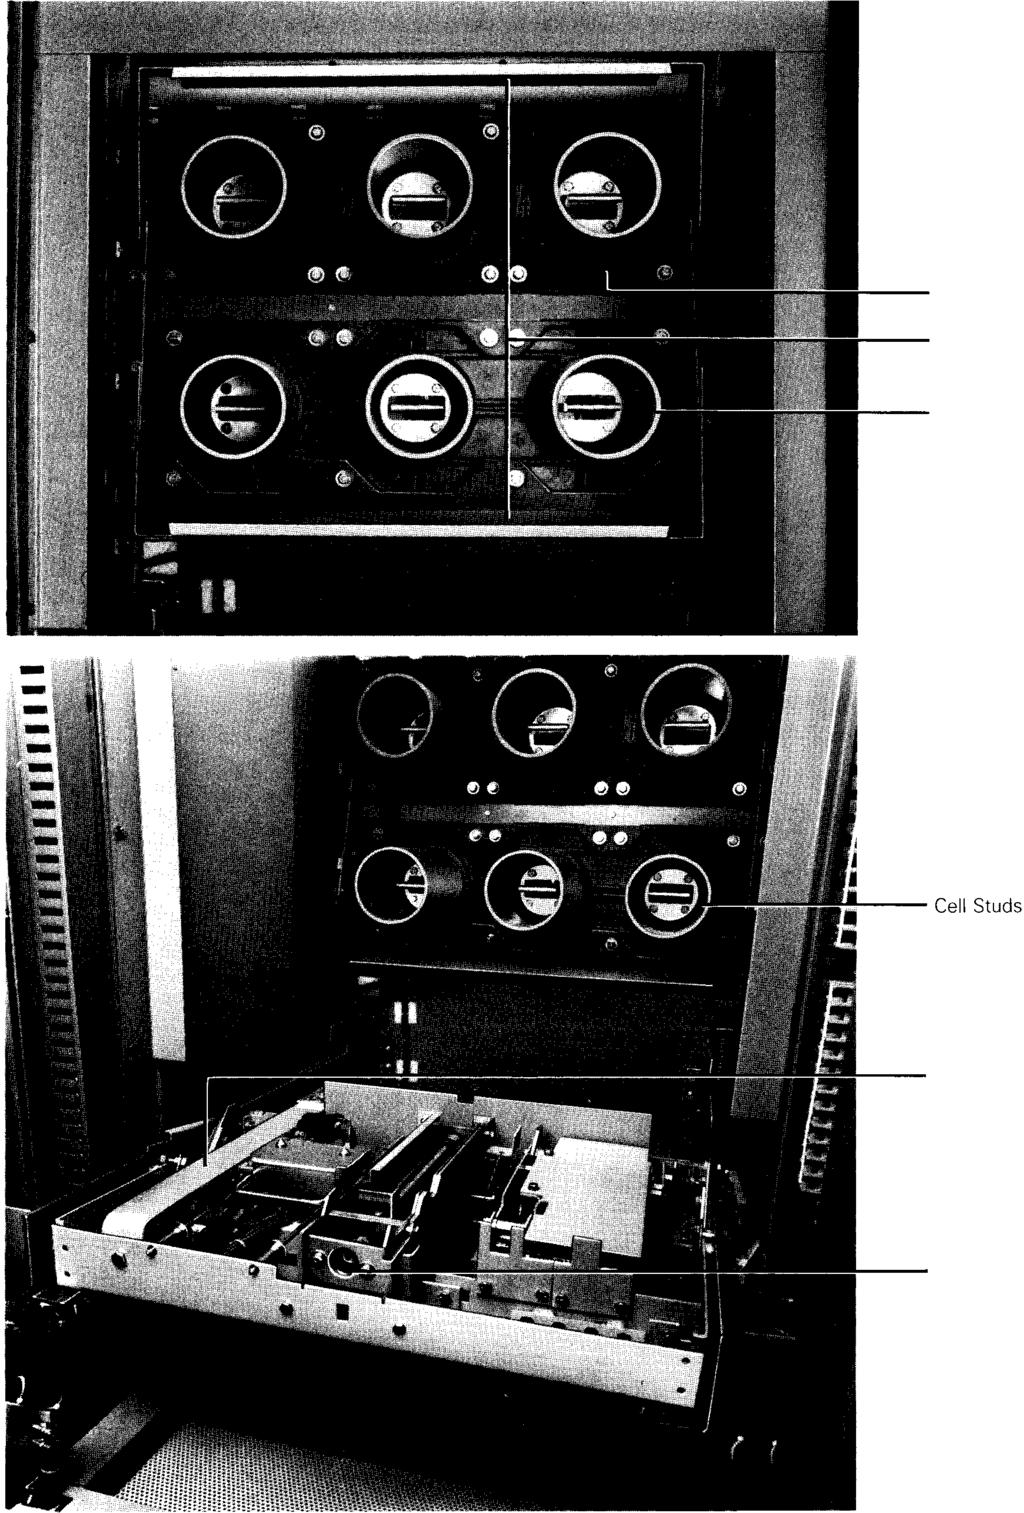 January, 1989 Page 7 Performance, Continued Cell Features The breaker compartment is shown with the automatic steel shutters forced into the open position, CT barrier removed.